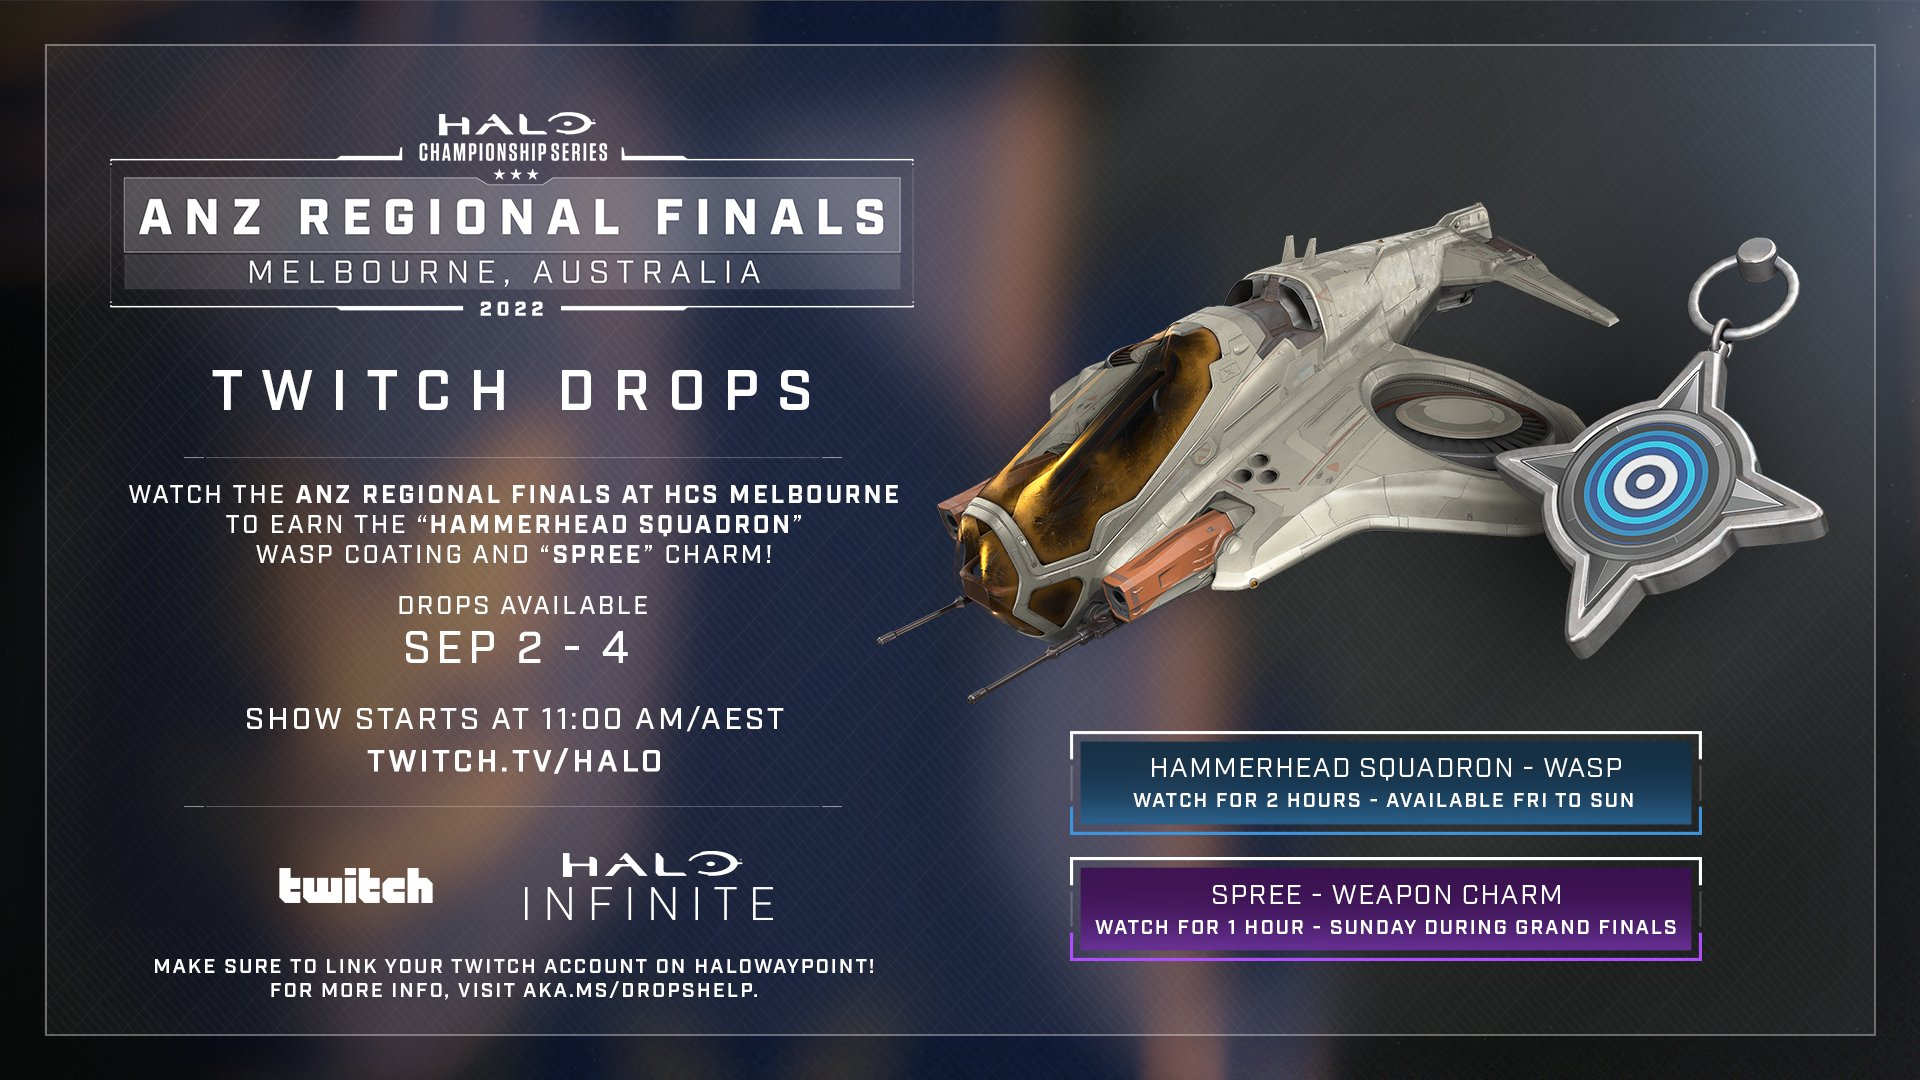 Skin WASP Hammerhead Squadron and Weapon Charm Spree 2022